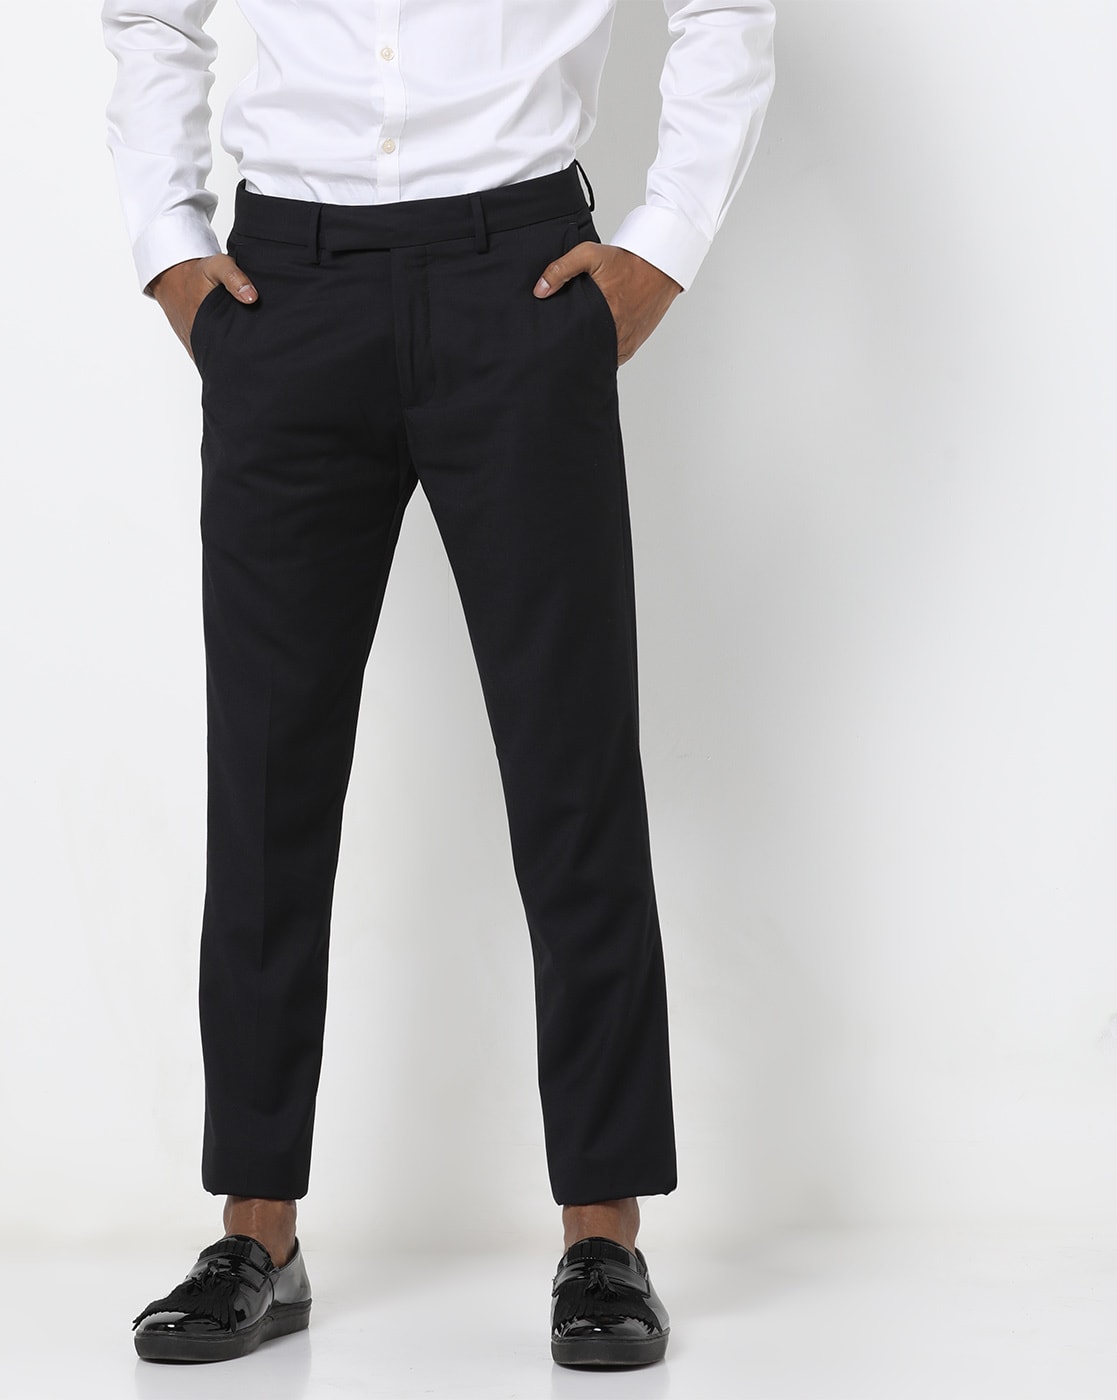 Men Cotton Trousers  Buy Men Cotton Trousers Online Starting at Just 294   Meesho